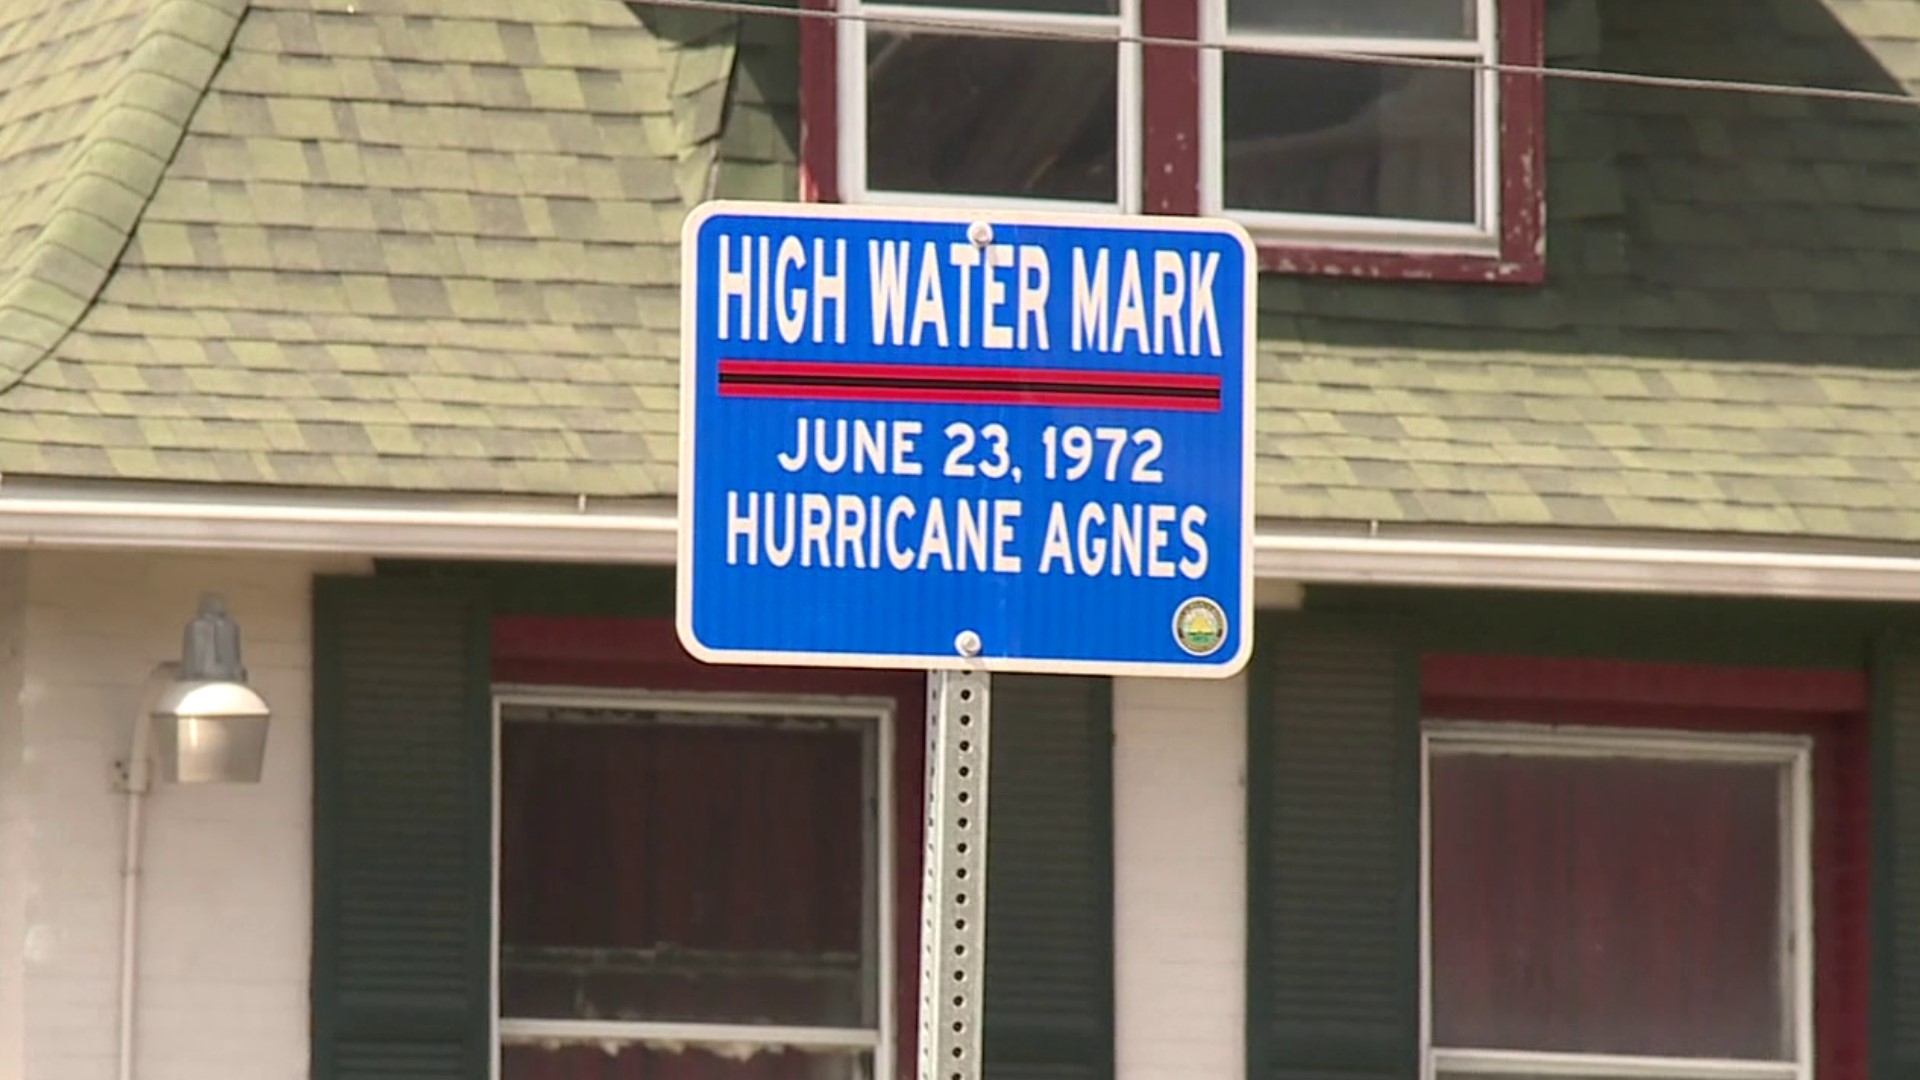 Fifty years ago, Hurricane Agnes' flooding swept residences "right off the foundation."